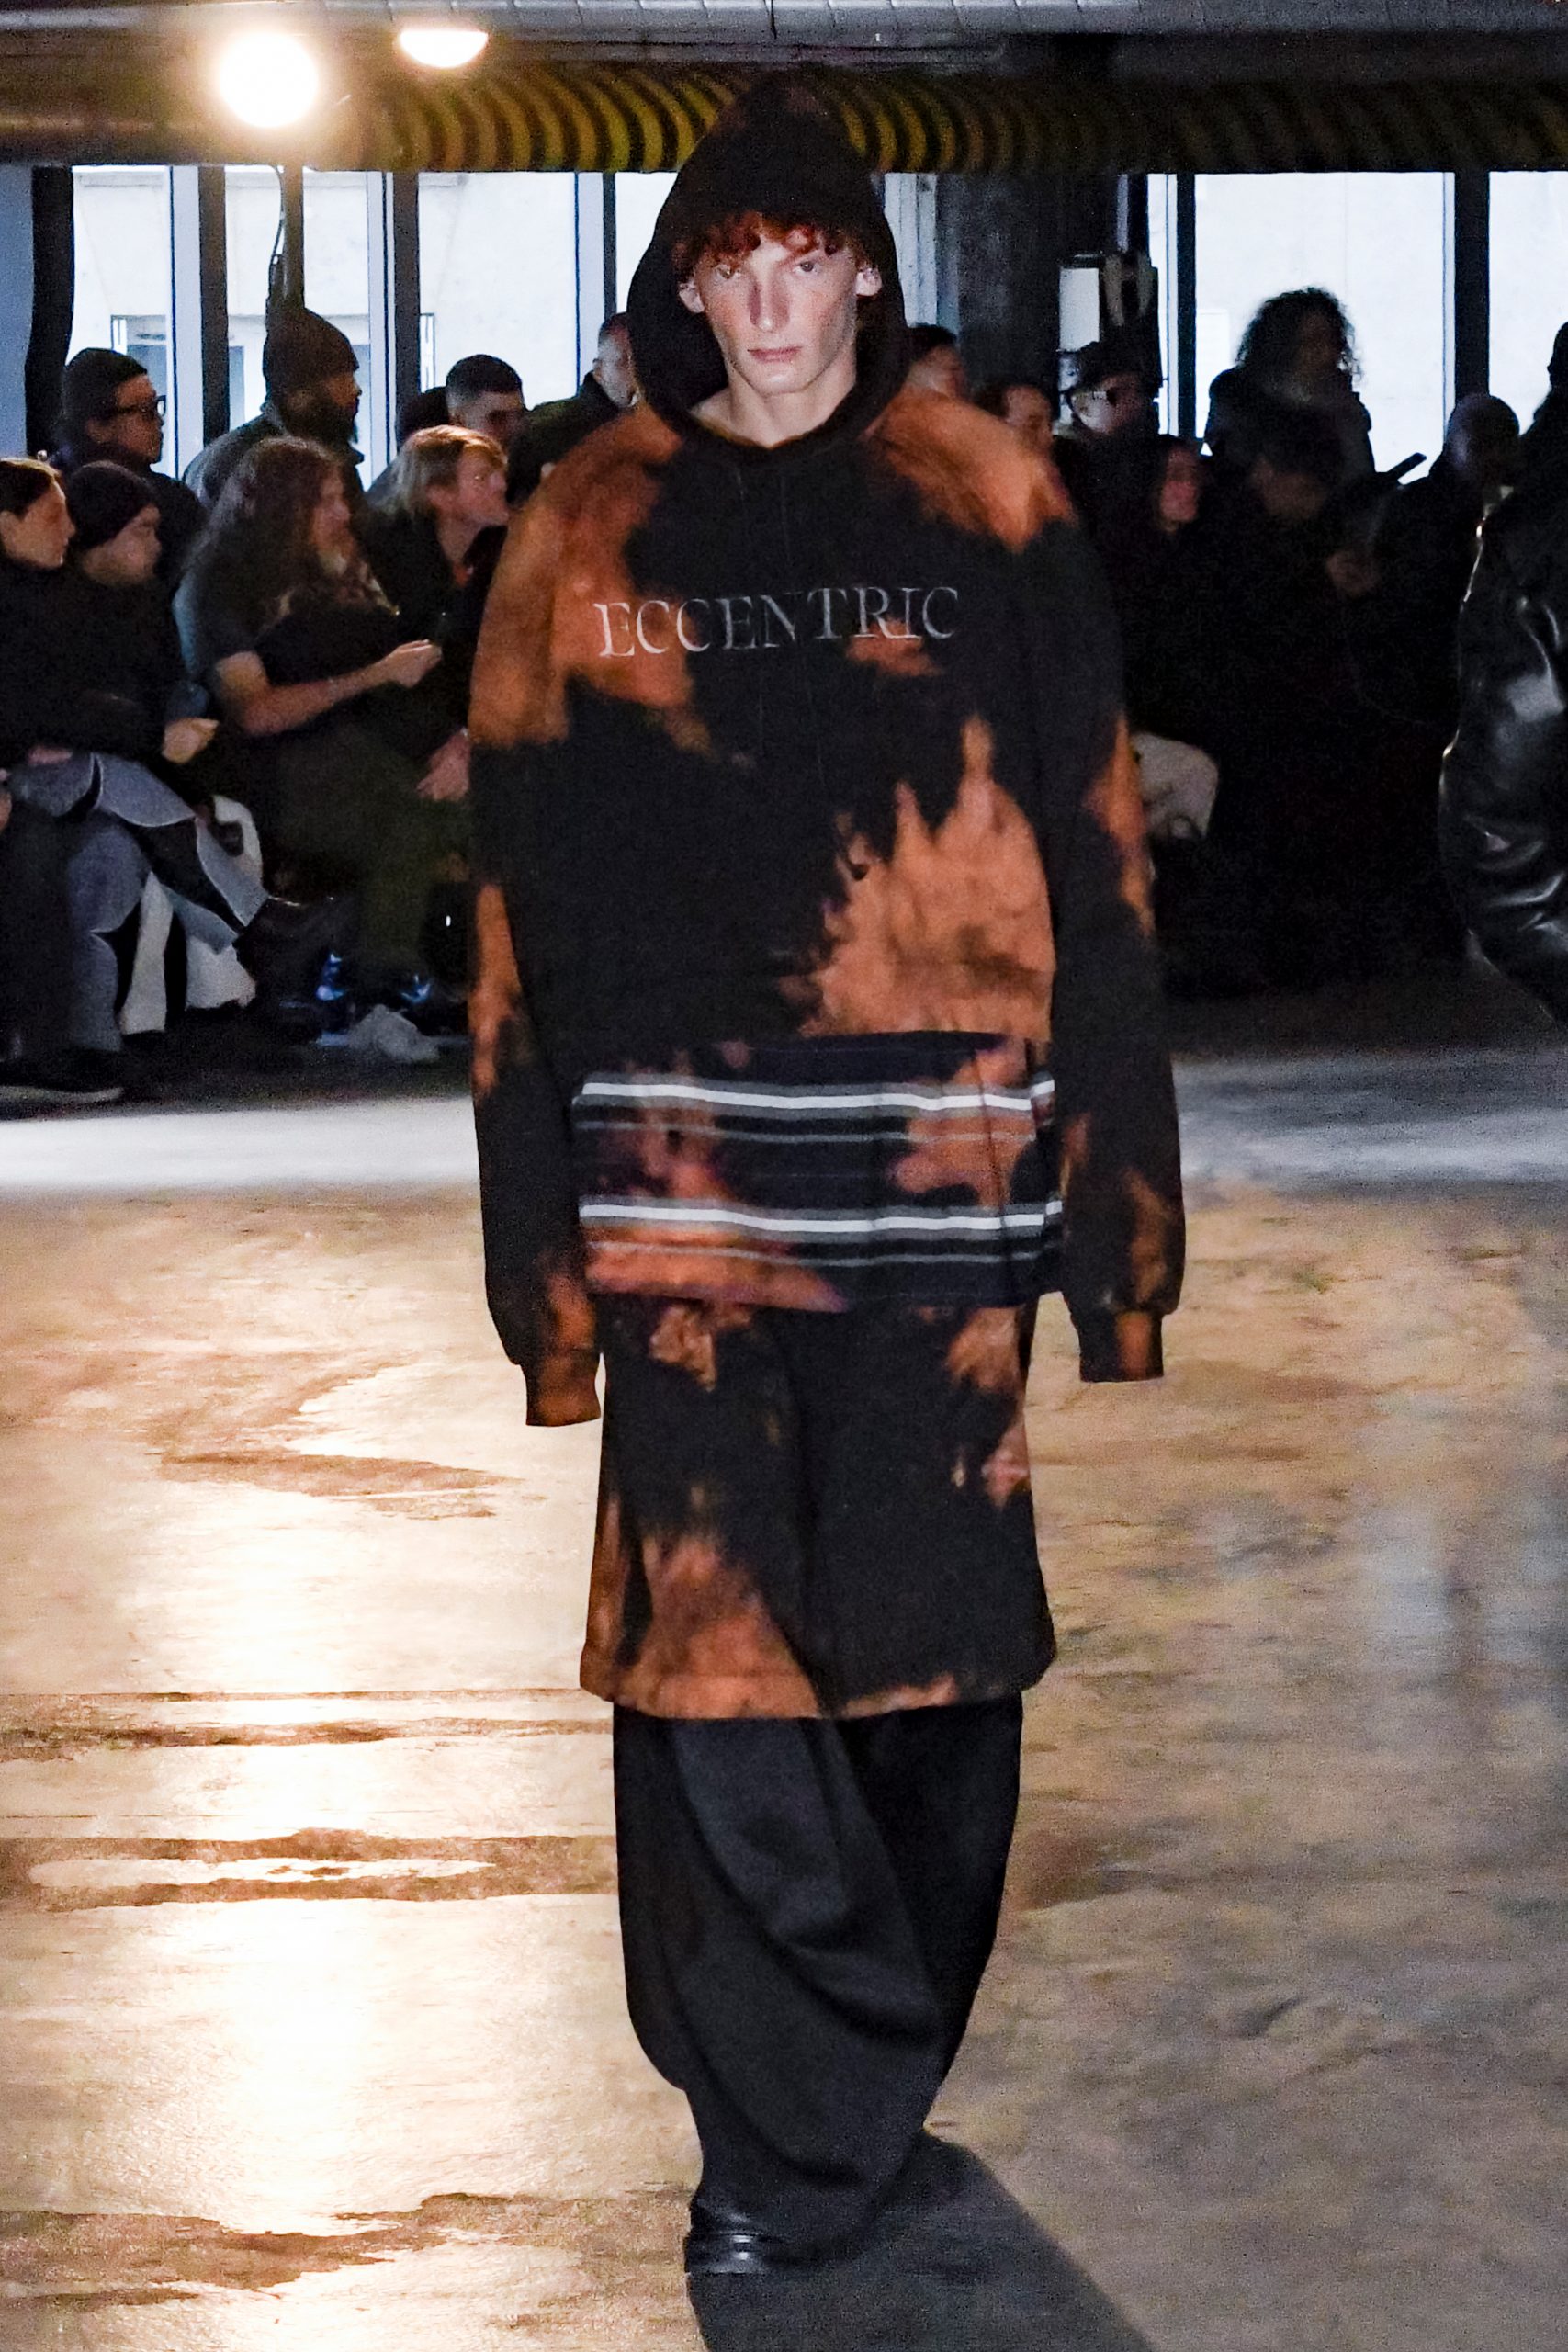 “Eccentric” -- this garment bears the theme of this collection.